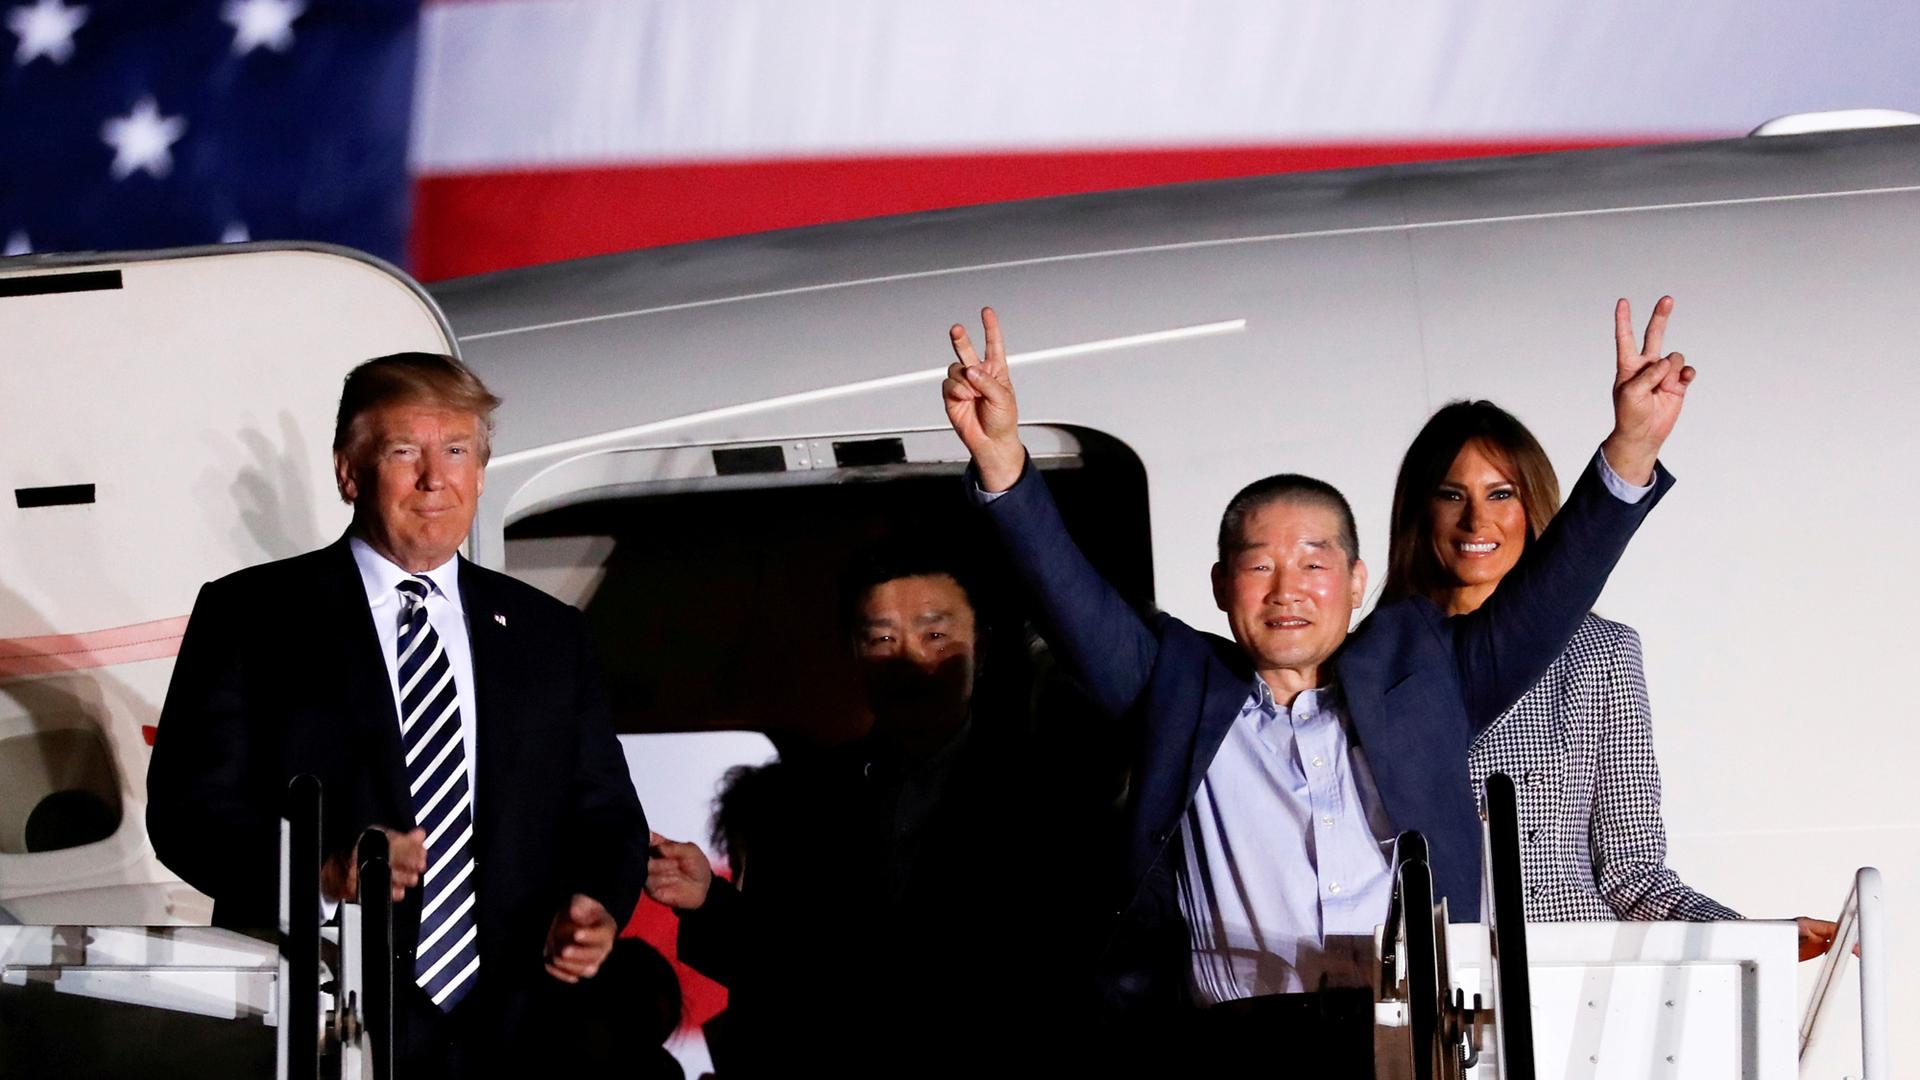 A man holds two fingers up on each hand as he exits an airplane. On the left is Donald Trump. Melania Trump is on the right.